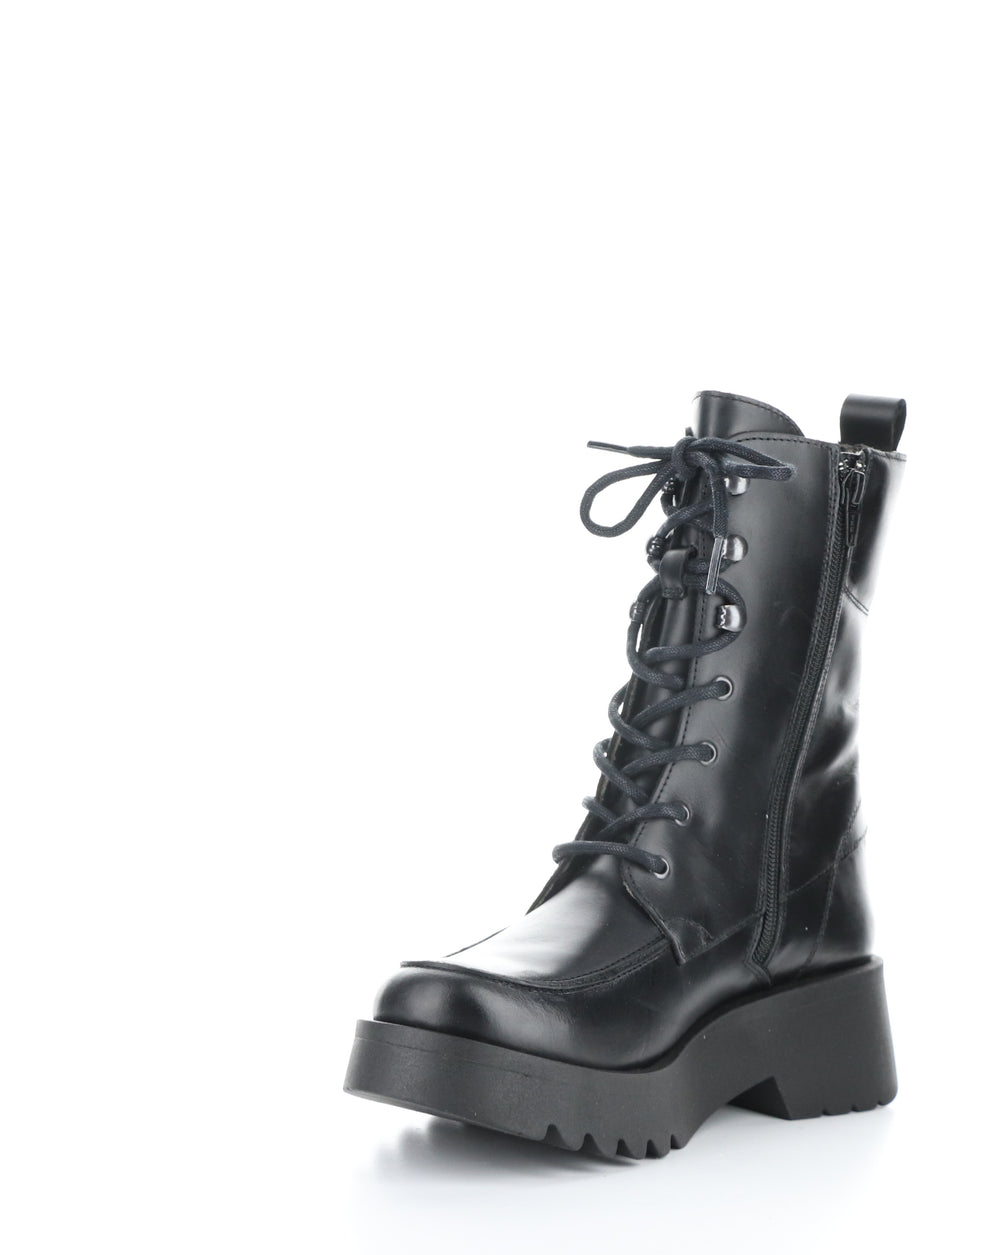 MORI990FLY 000 BLACK Lace-up Boots